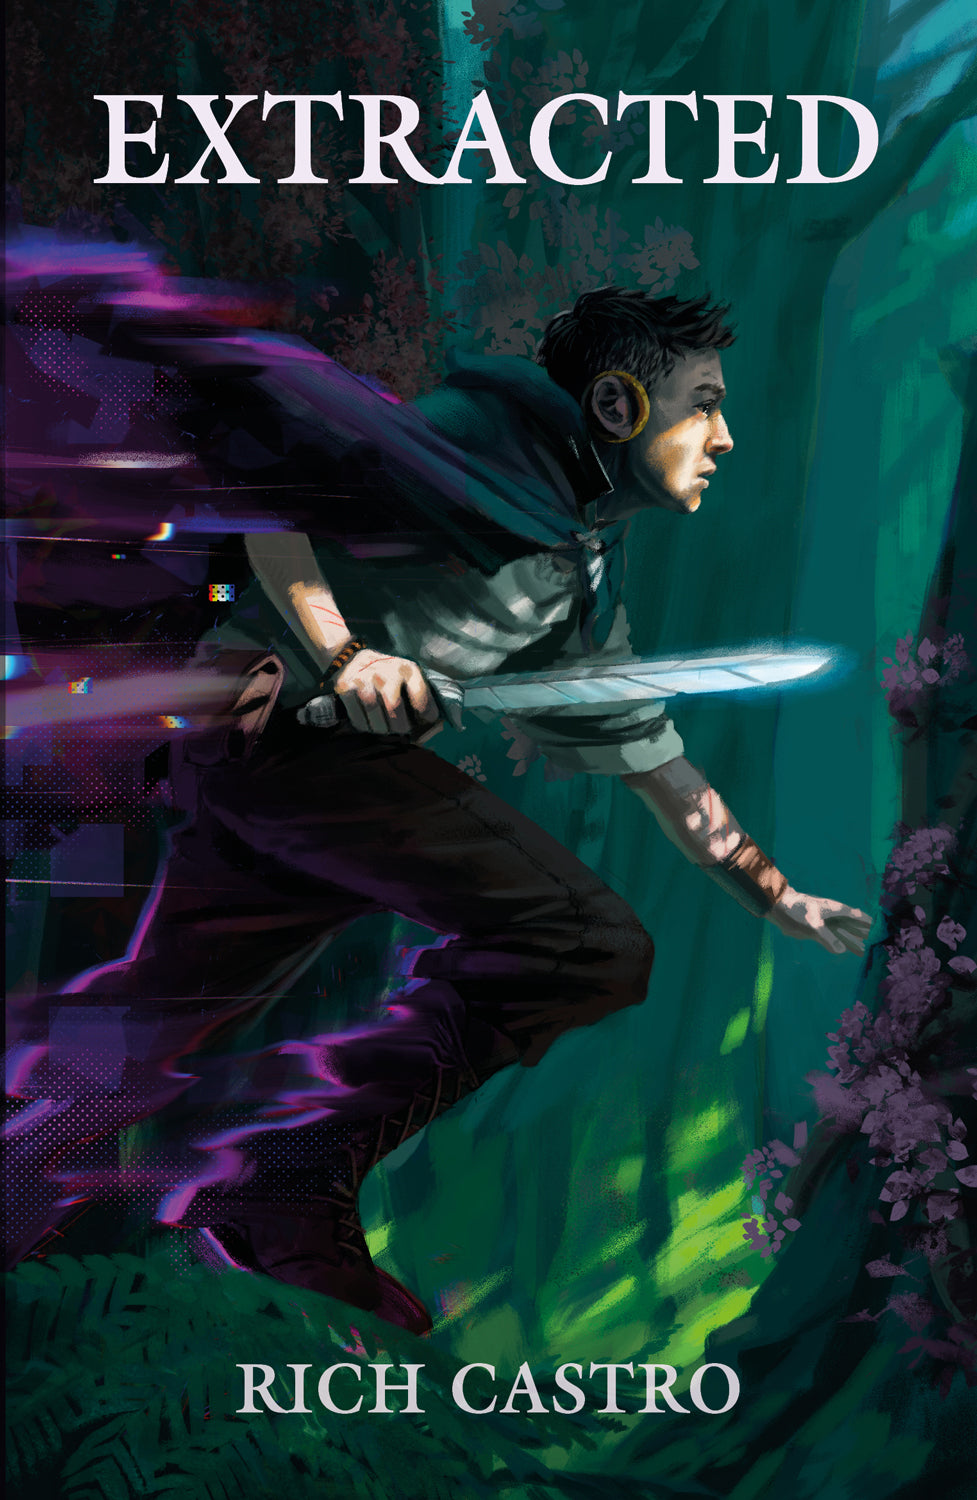 Christian fiction fantasy book cover, teenager with sword